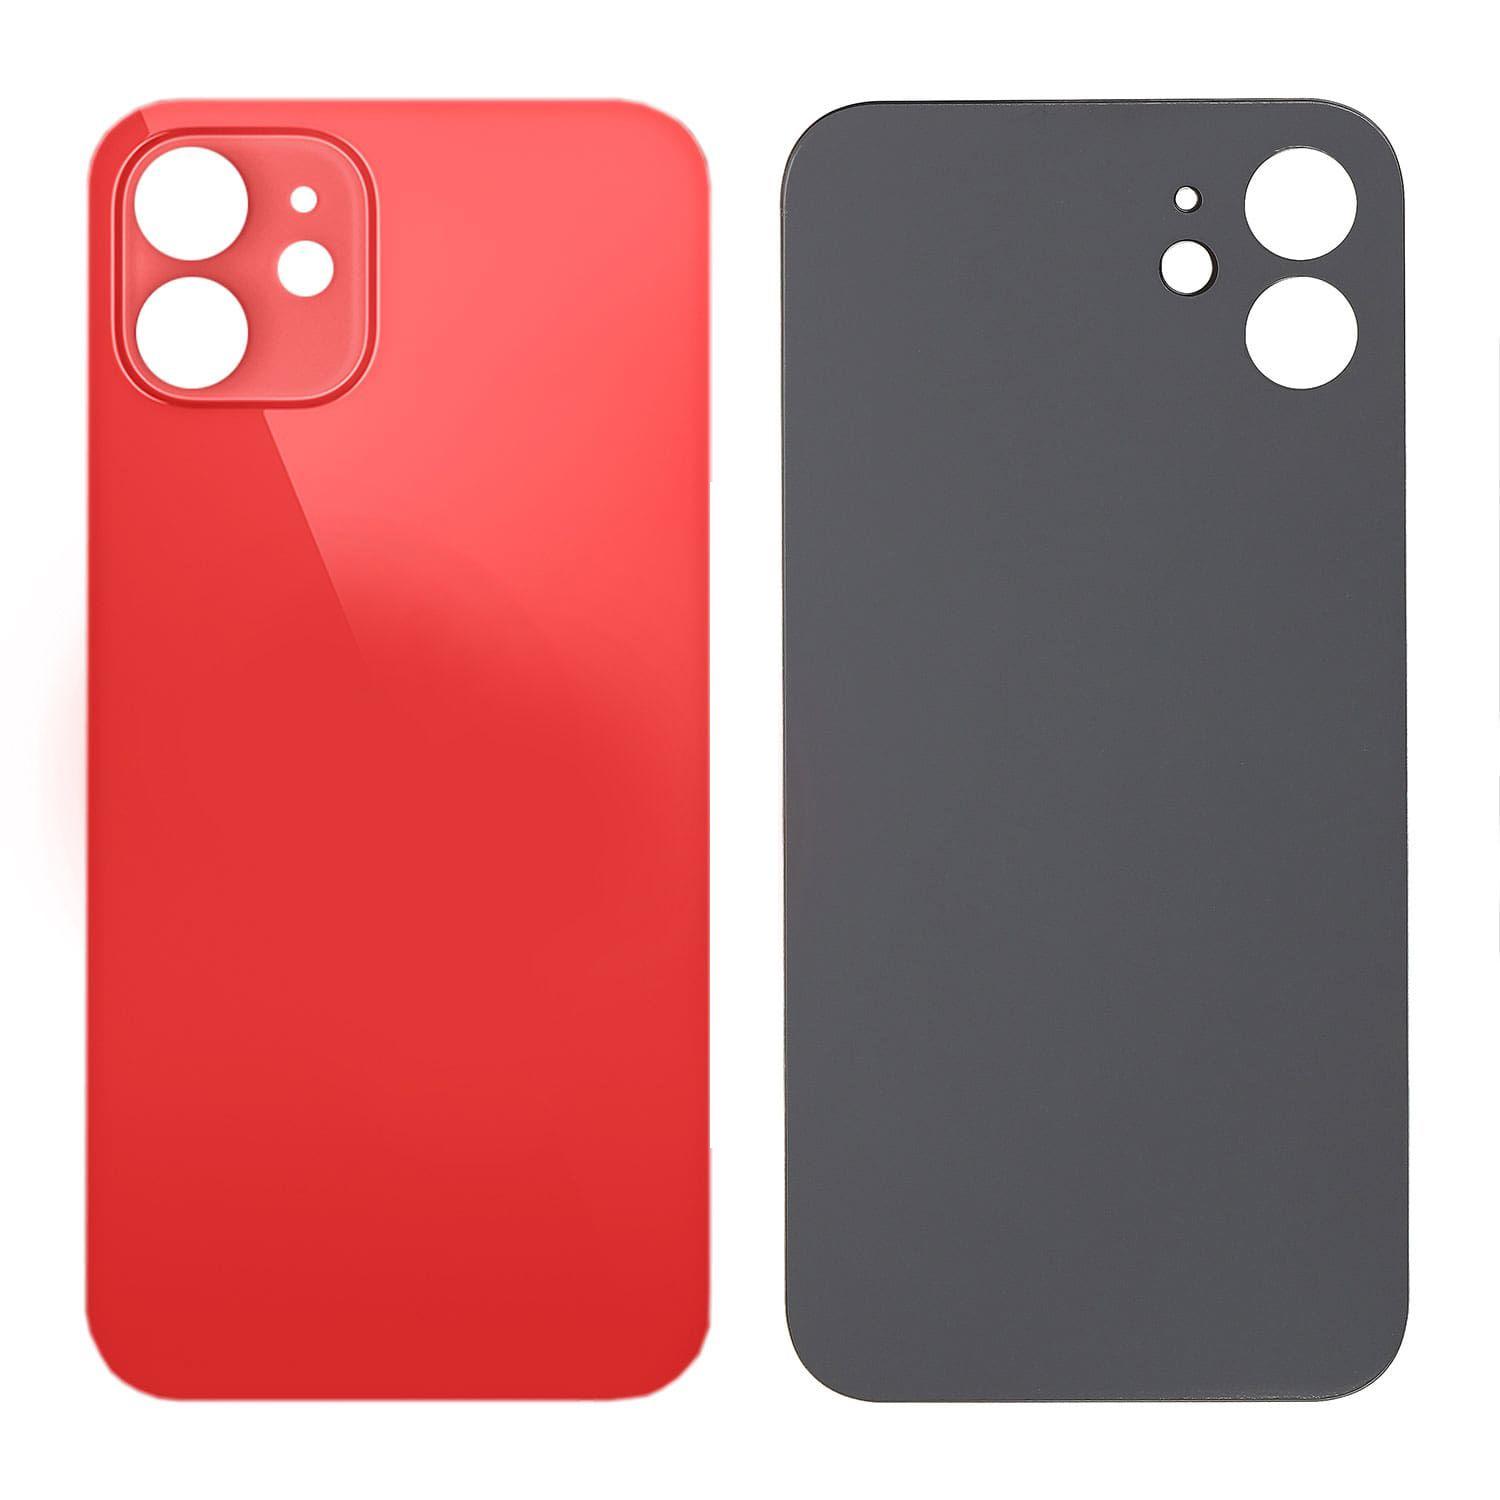 Battery cover iPhone 12 mini with bigger hole for camera glass - red